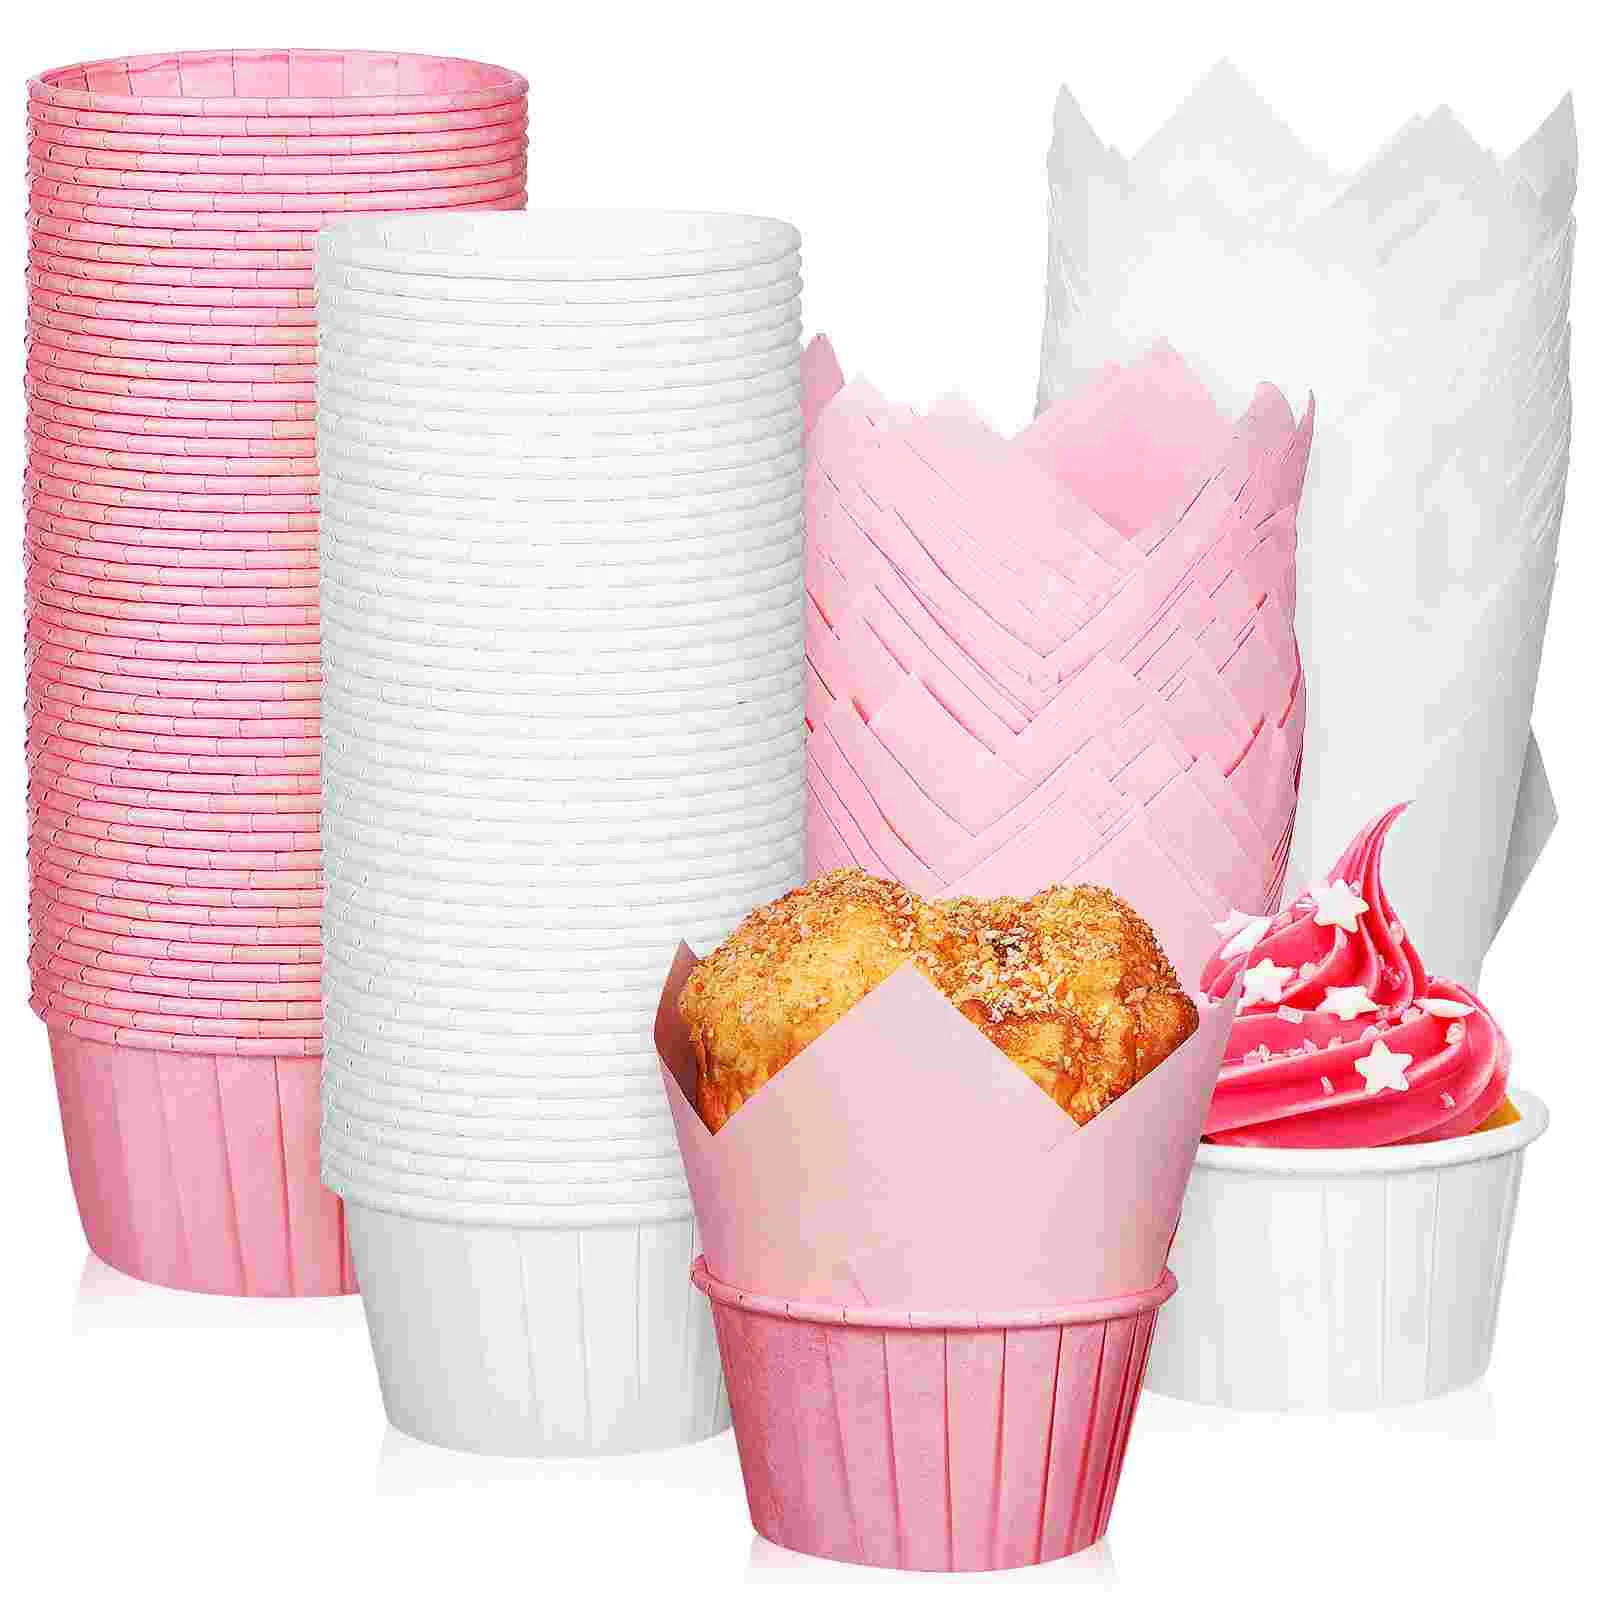 

200 Pcs Mini Muffin Papers Baking Liners Holders Tulip Cups Cupcake Cases Wrappers Wedding